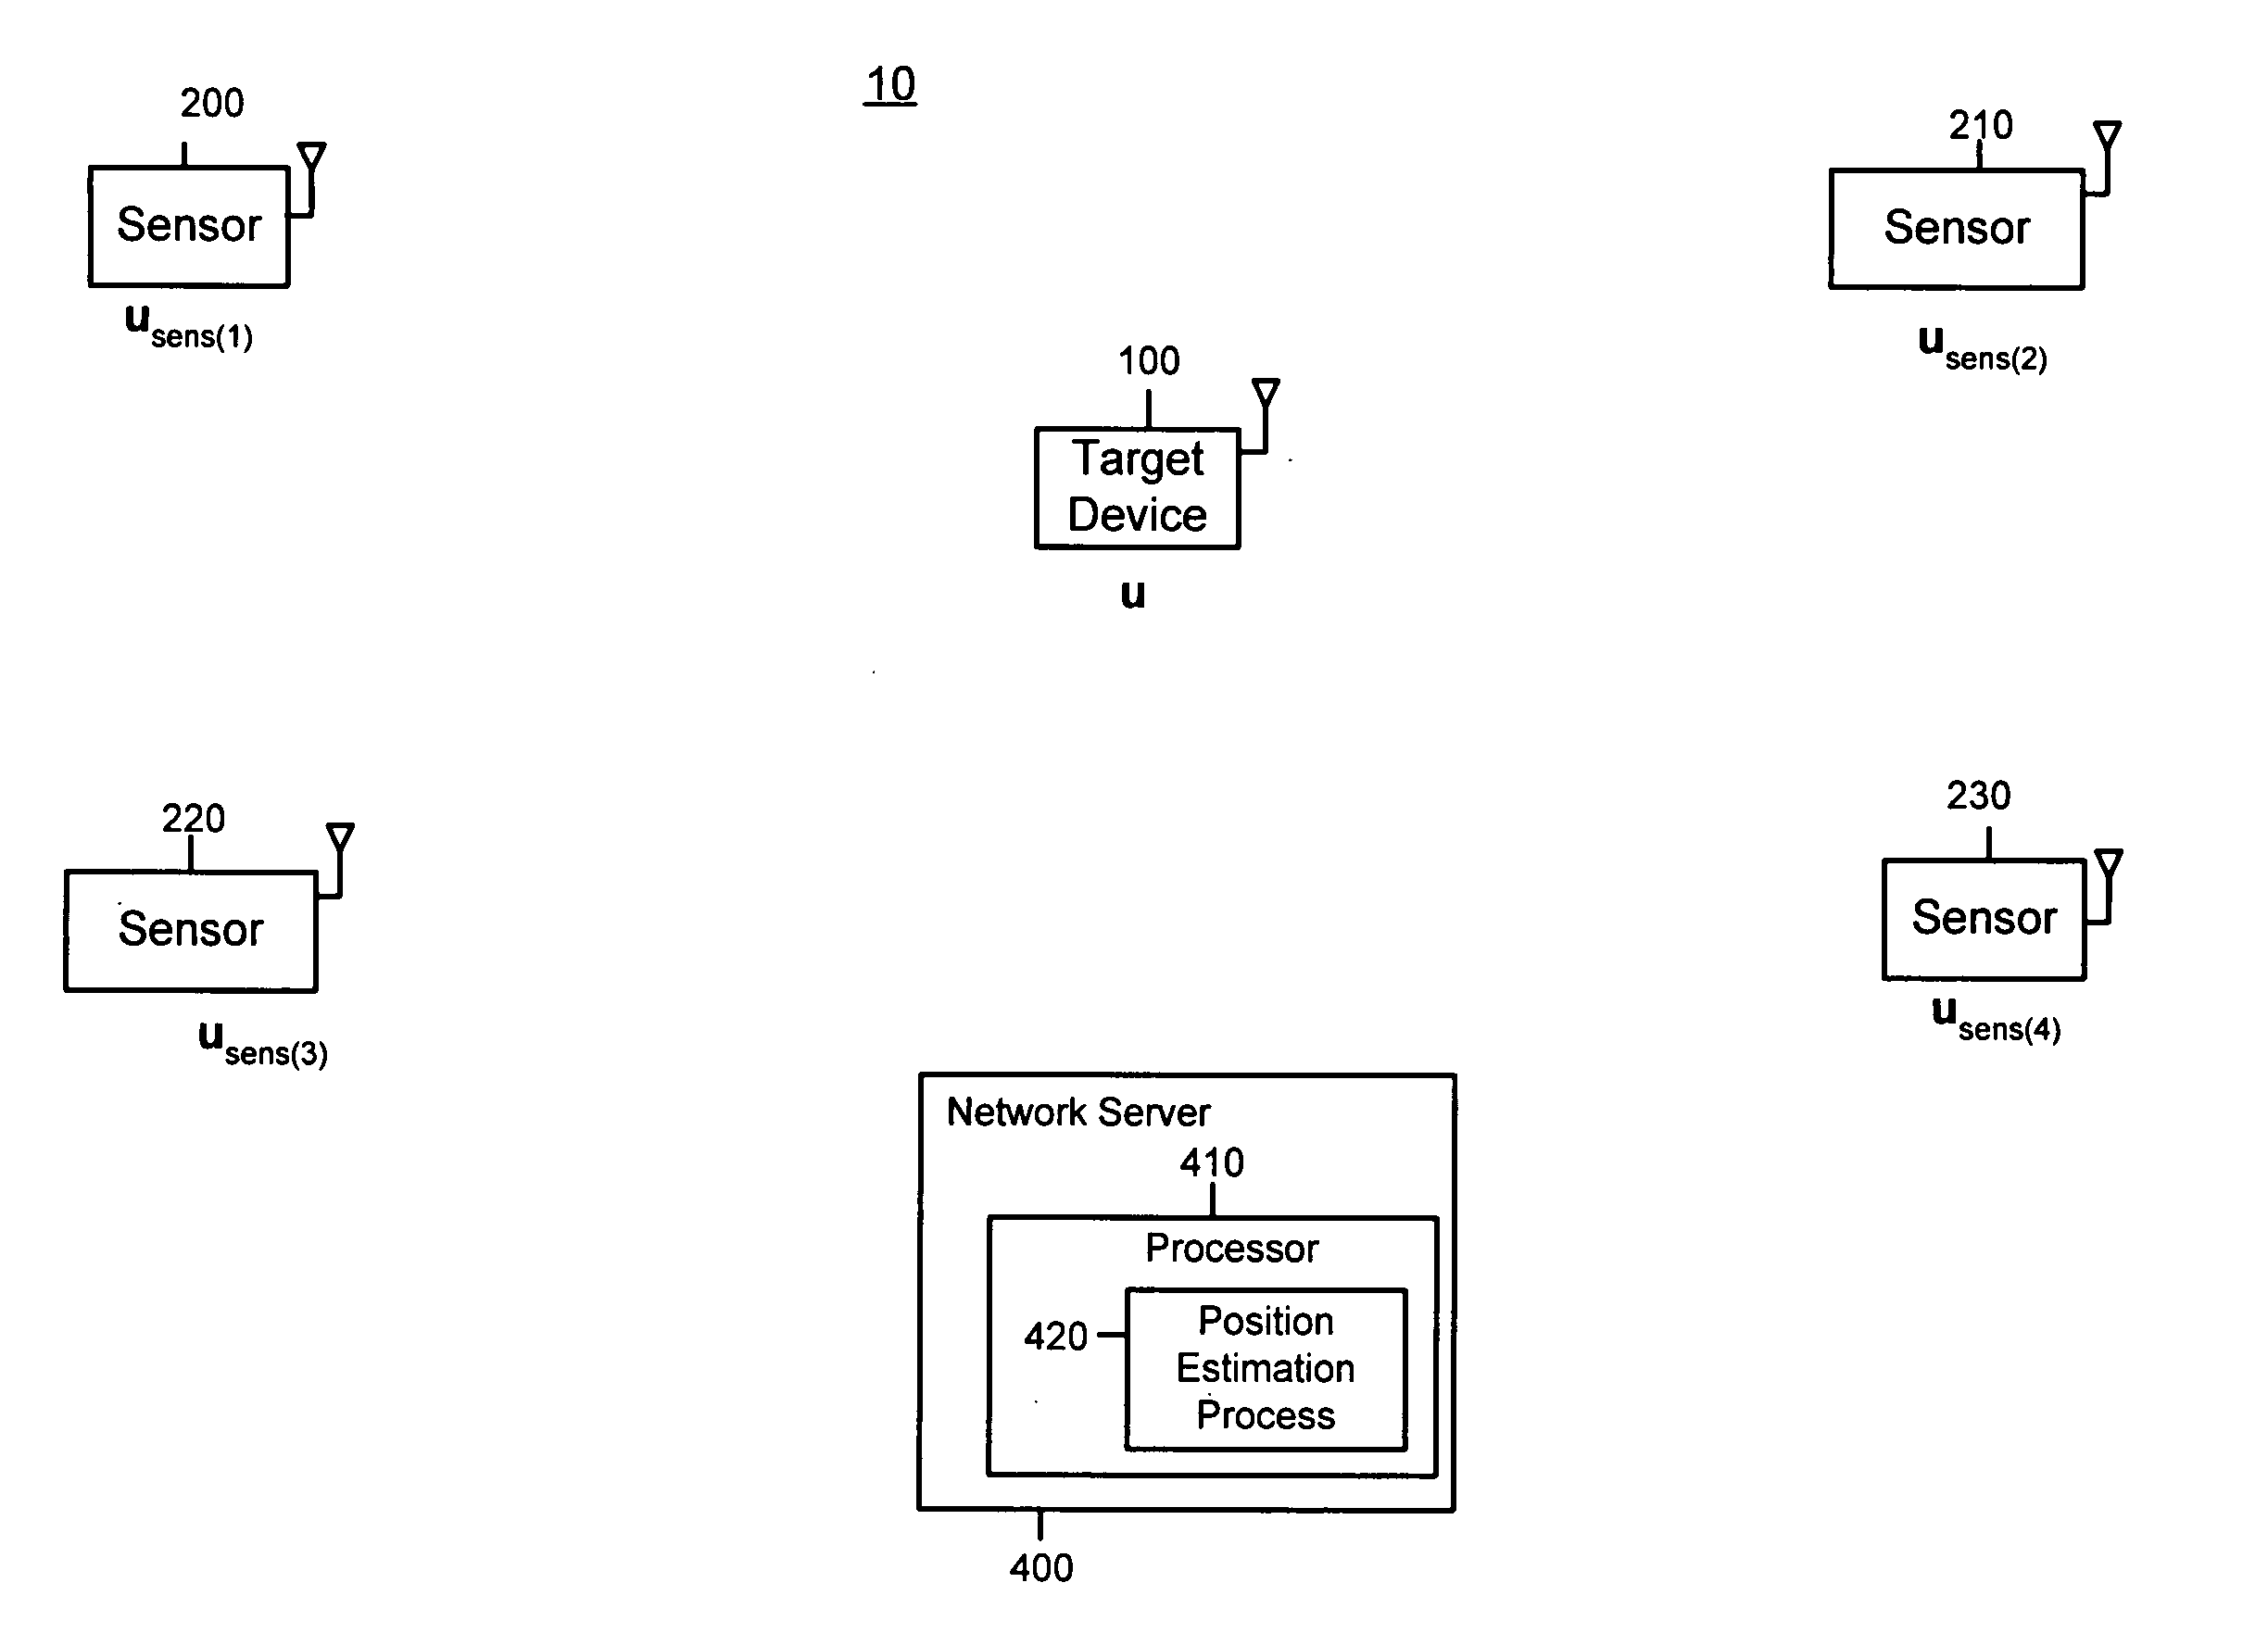 System and method for locating radio emitters using self-calibrated path loss computation